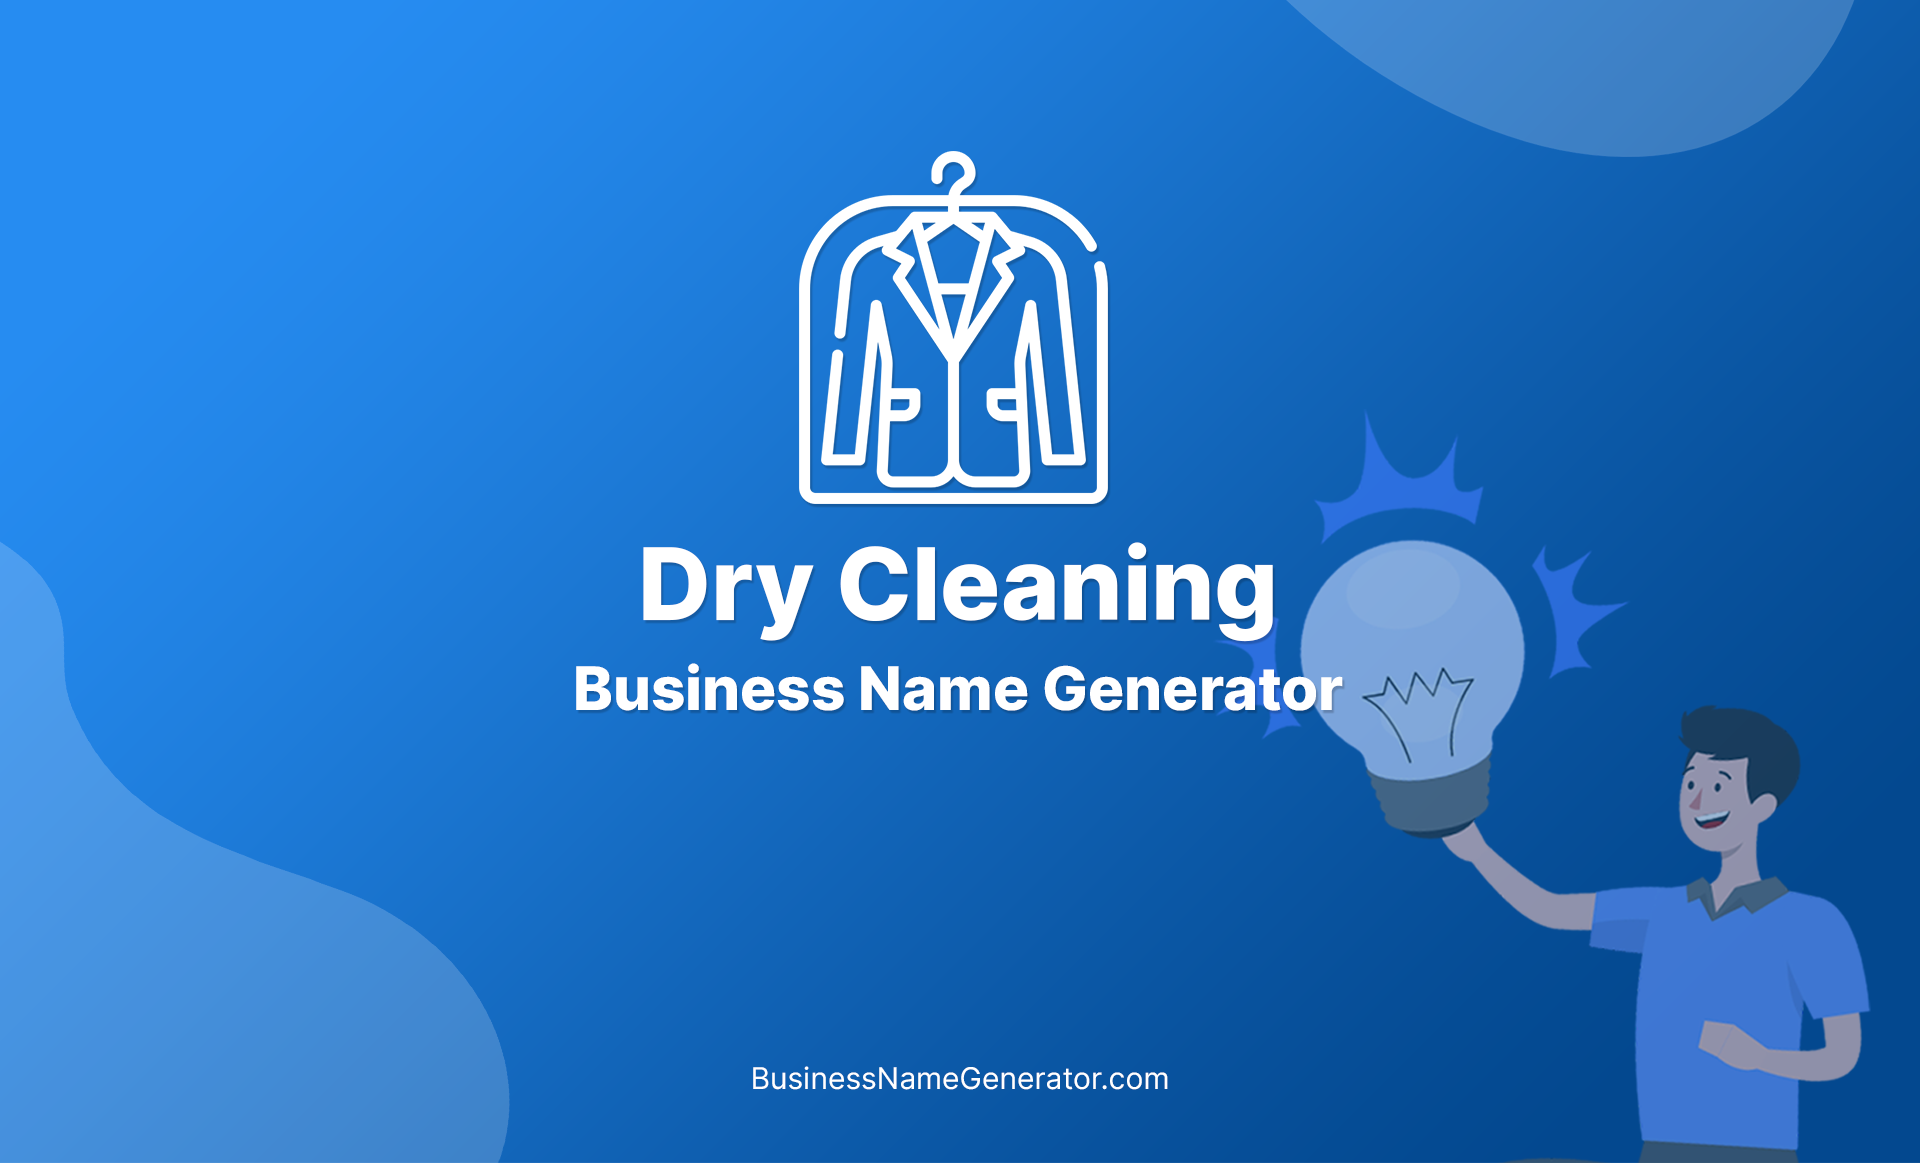 Dry Cleaning Business Name Generator